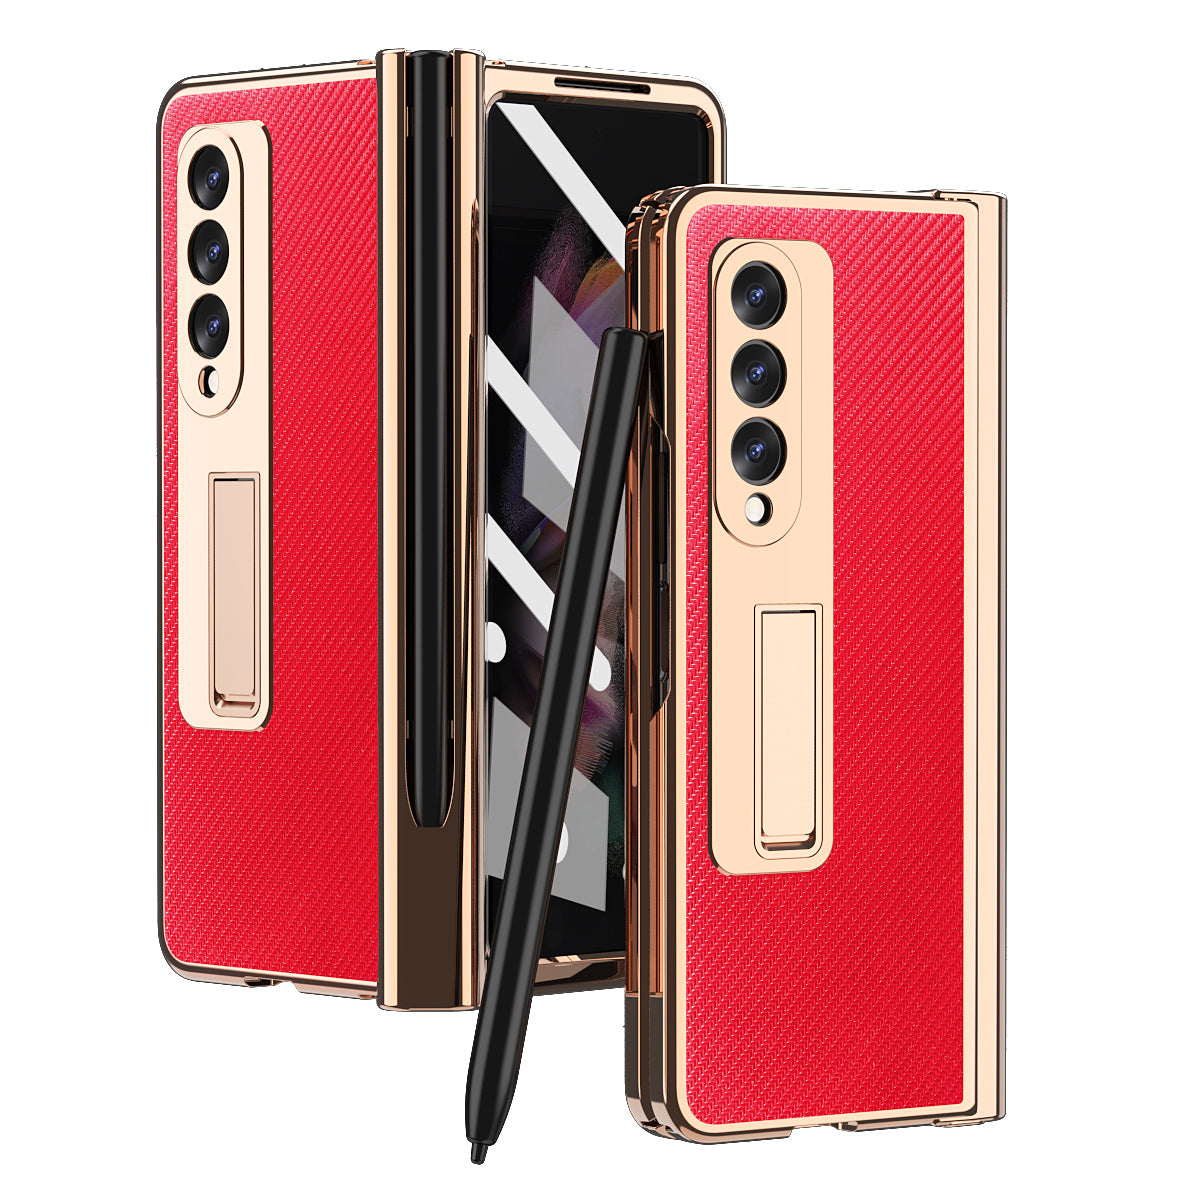 Samsung Galaxy Z Fold 4 3 2 5G Case 2 PCS Hinge Pen Slot Front Screen Glass With Capacitive Pen